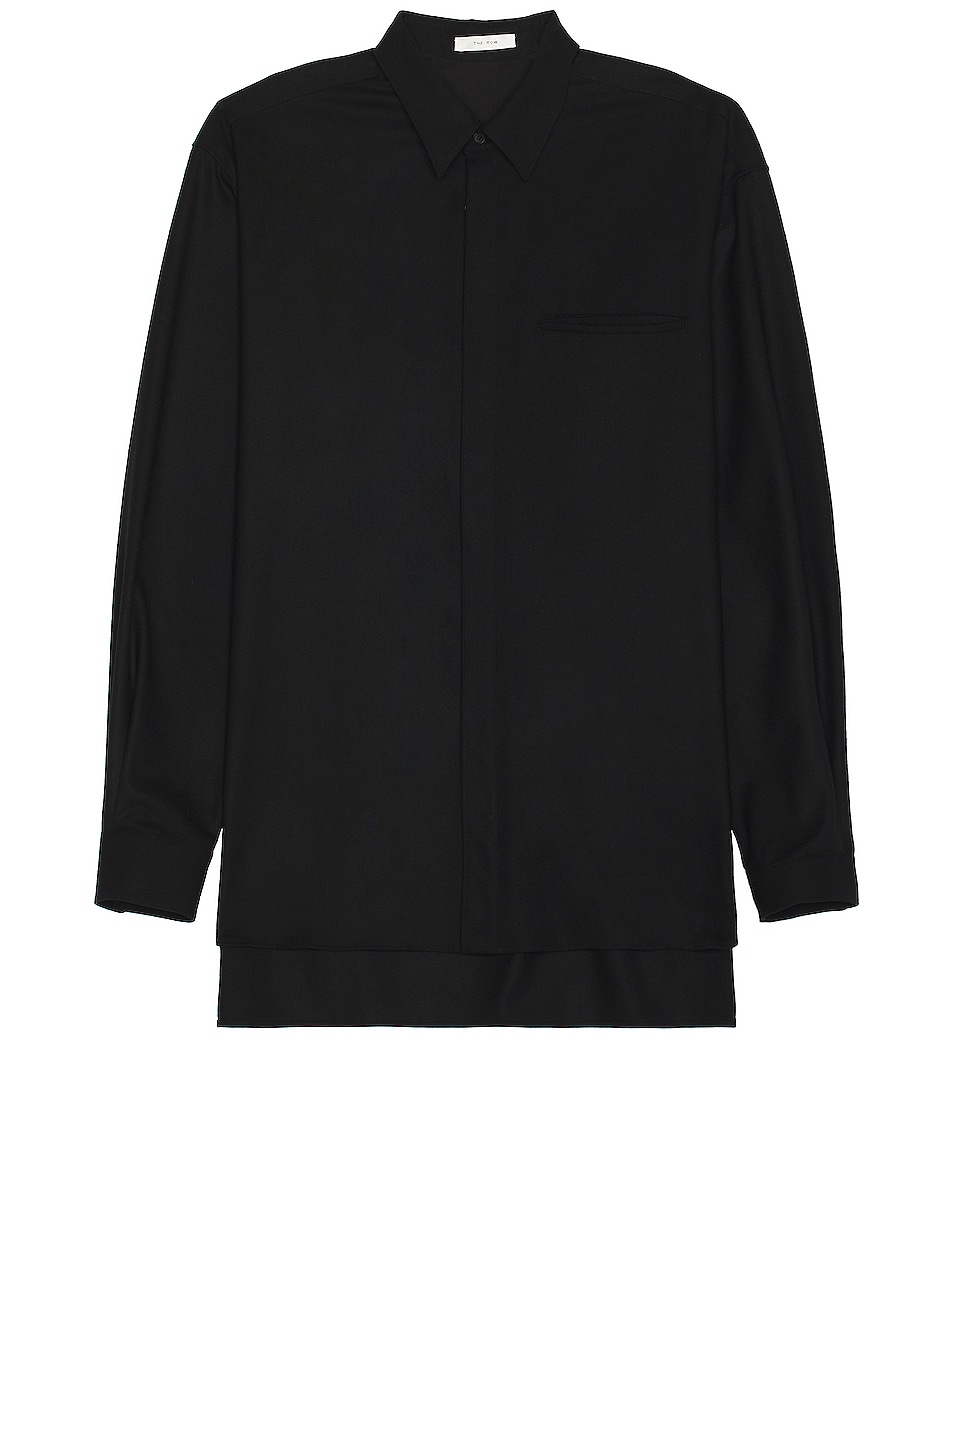 Image 1 of The Row Fili Shirt in Black